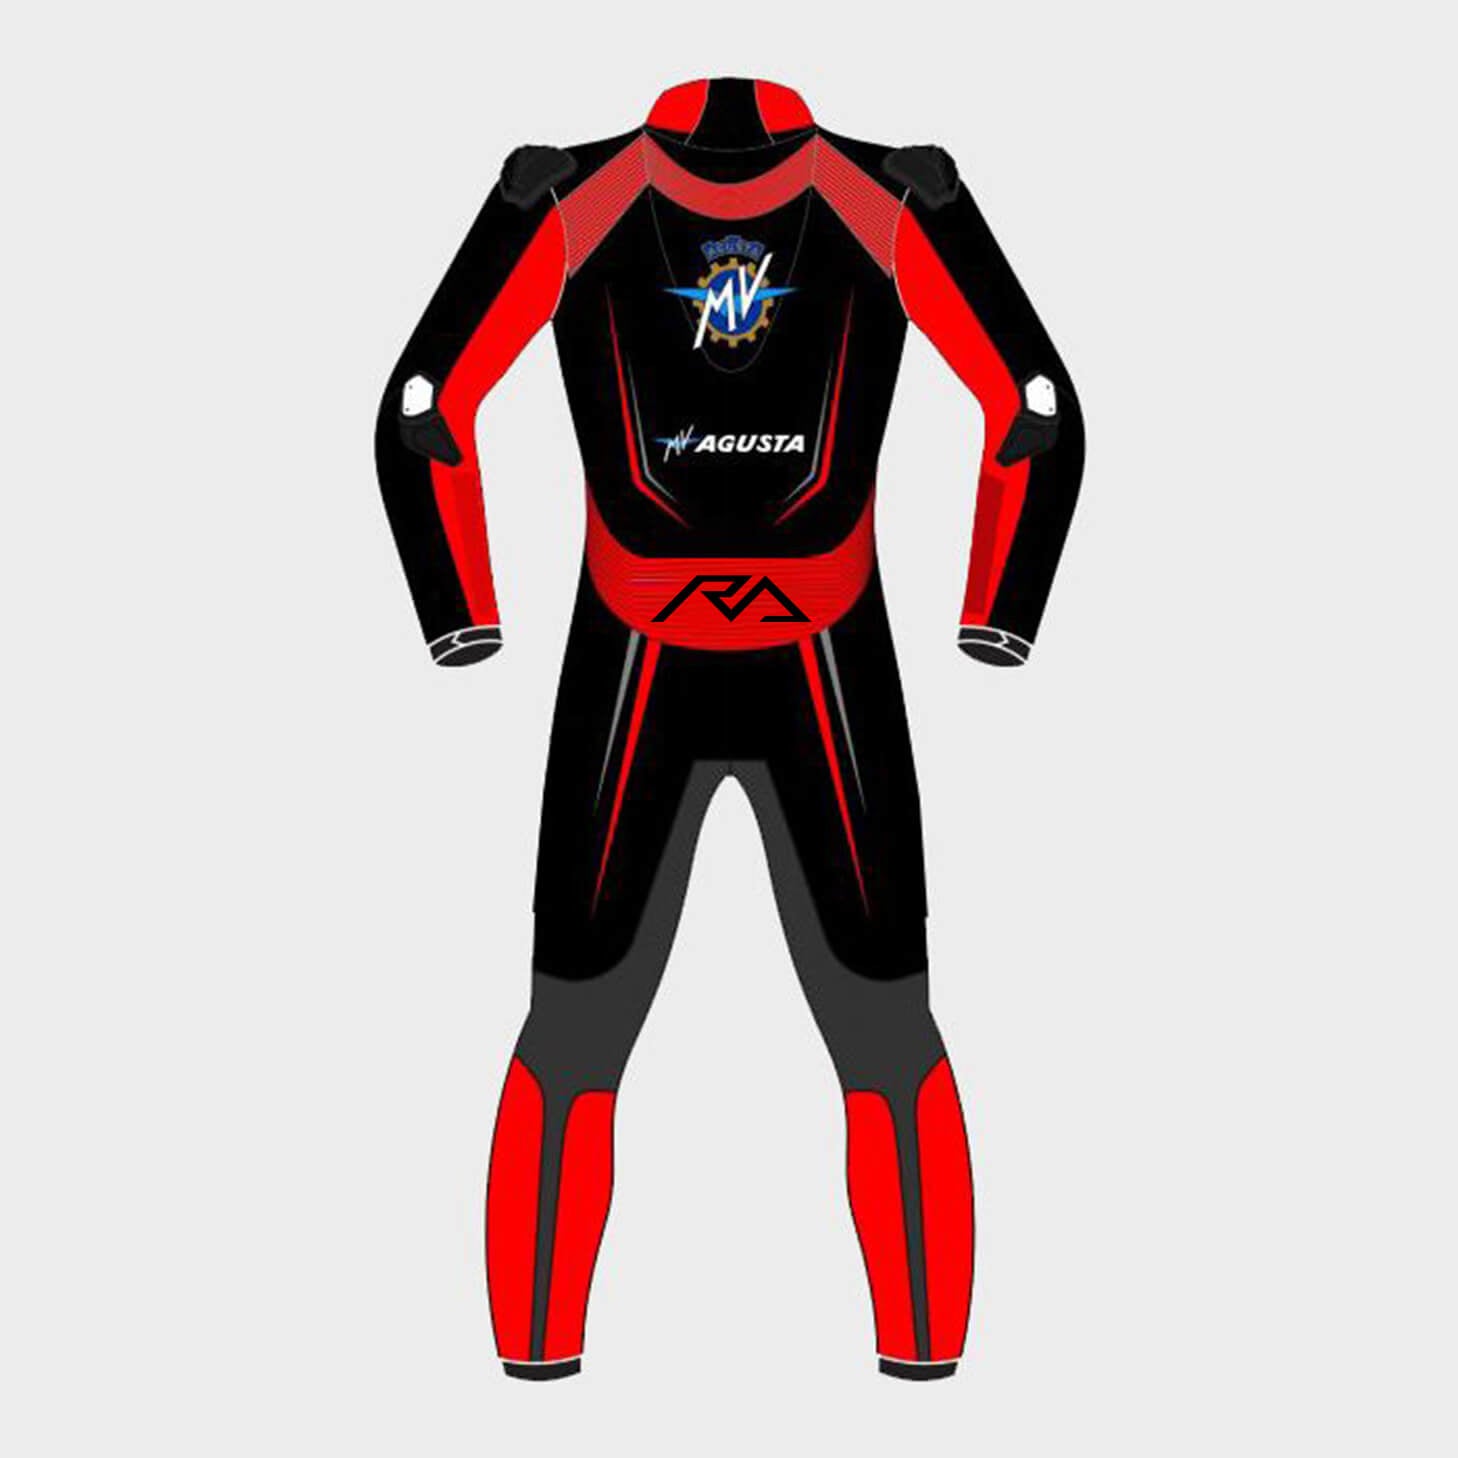 mv_agusta_2017_motorcycle_leather_suit_back